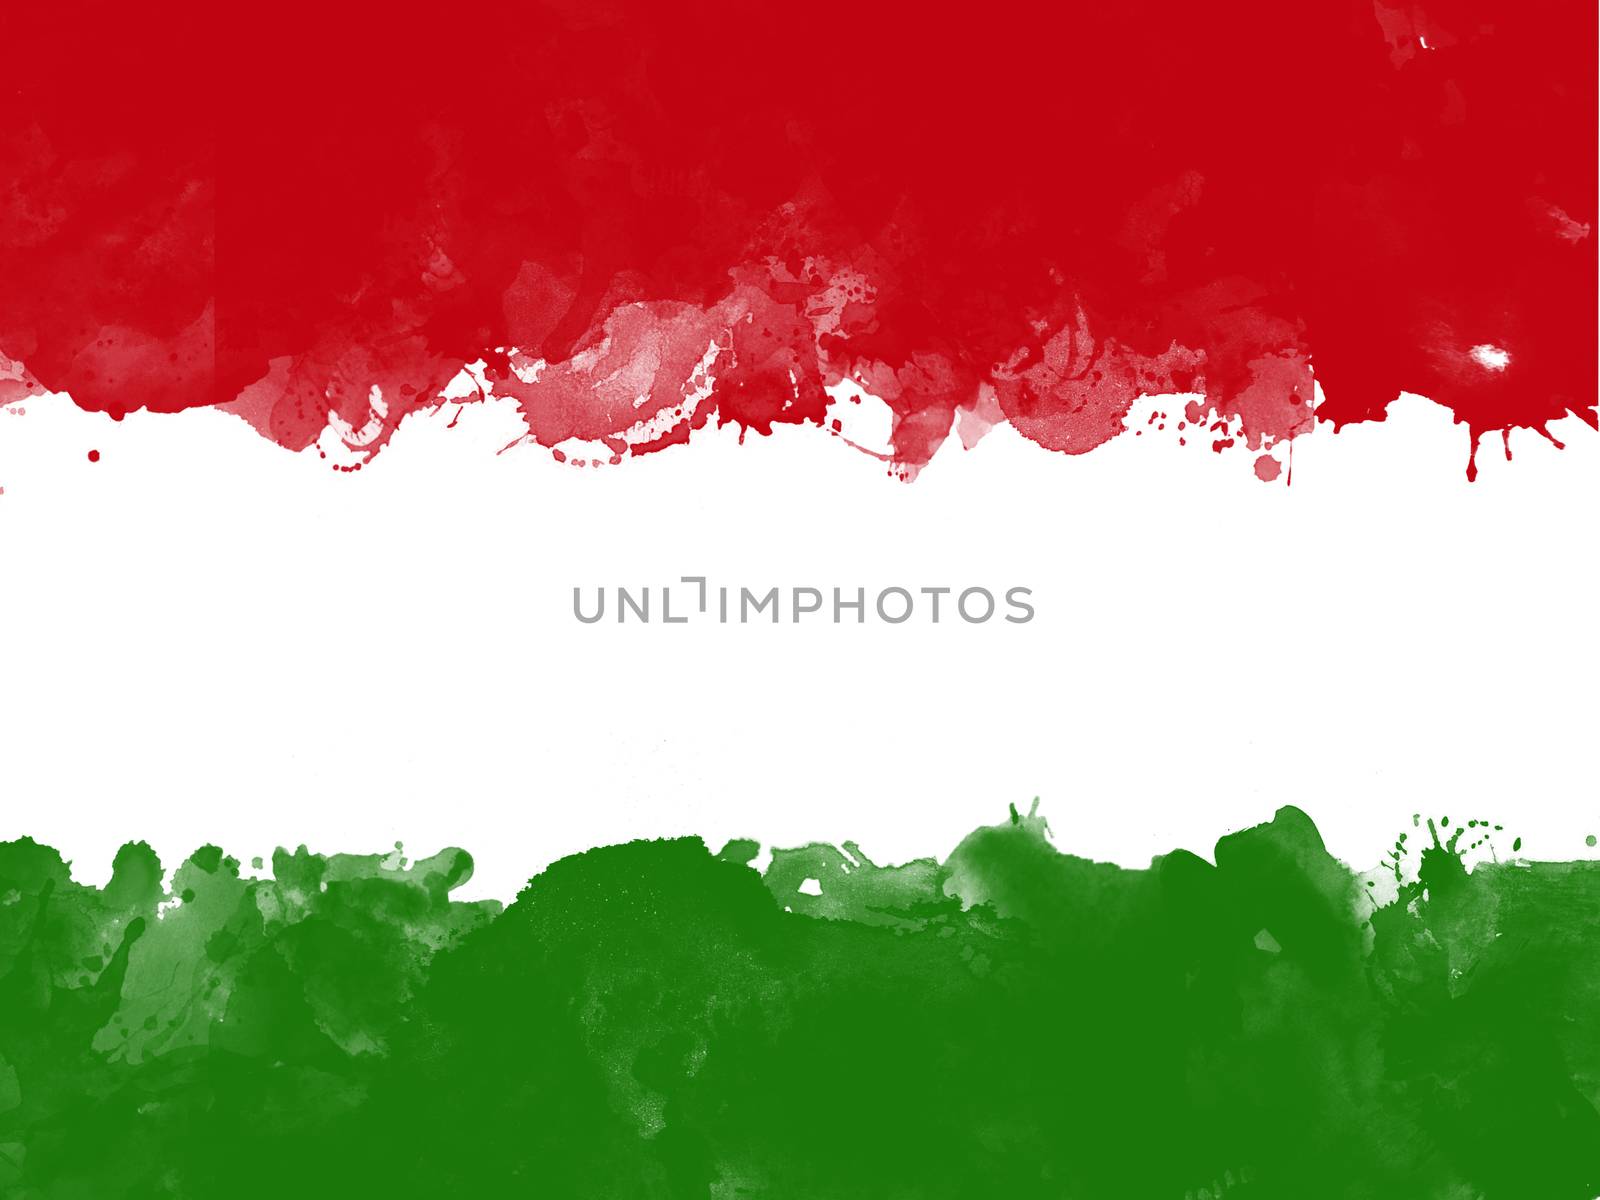 Flag of Hungary by watercolor paint brush, grunge style